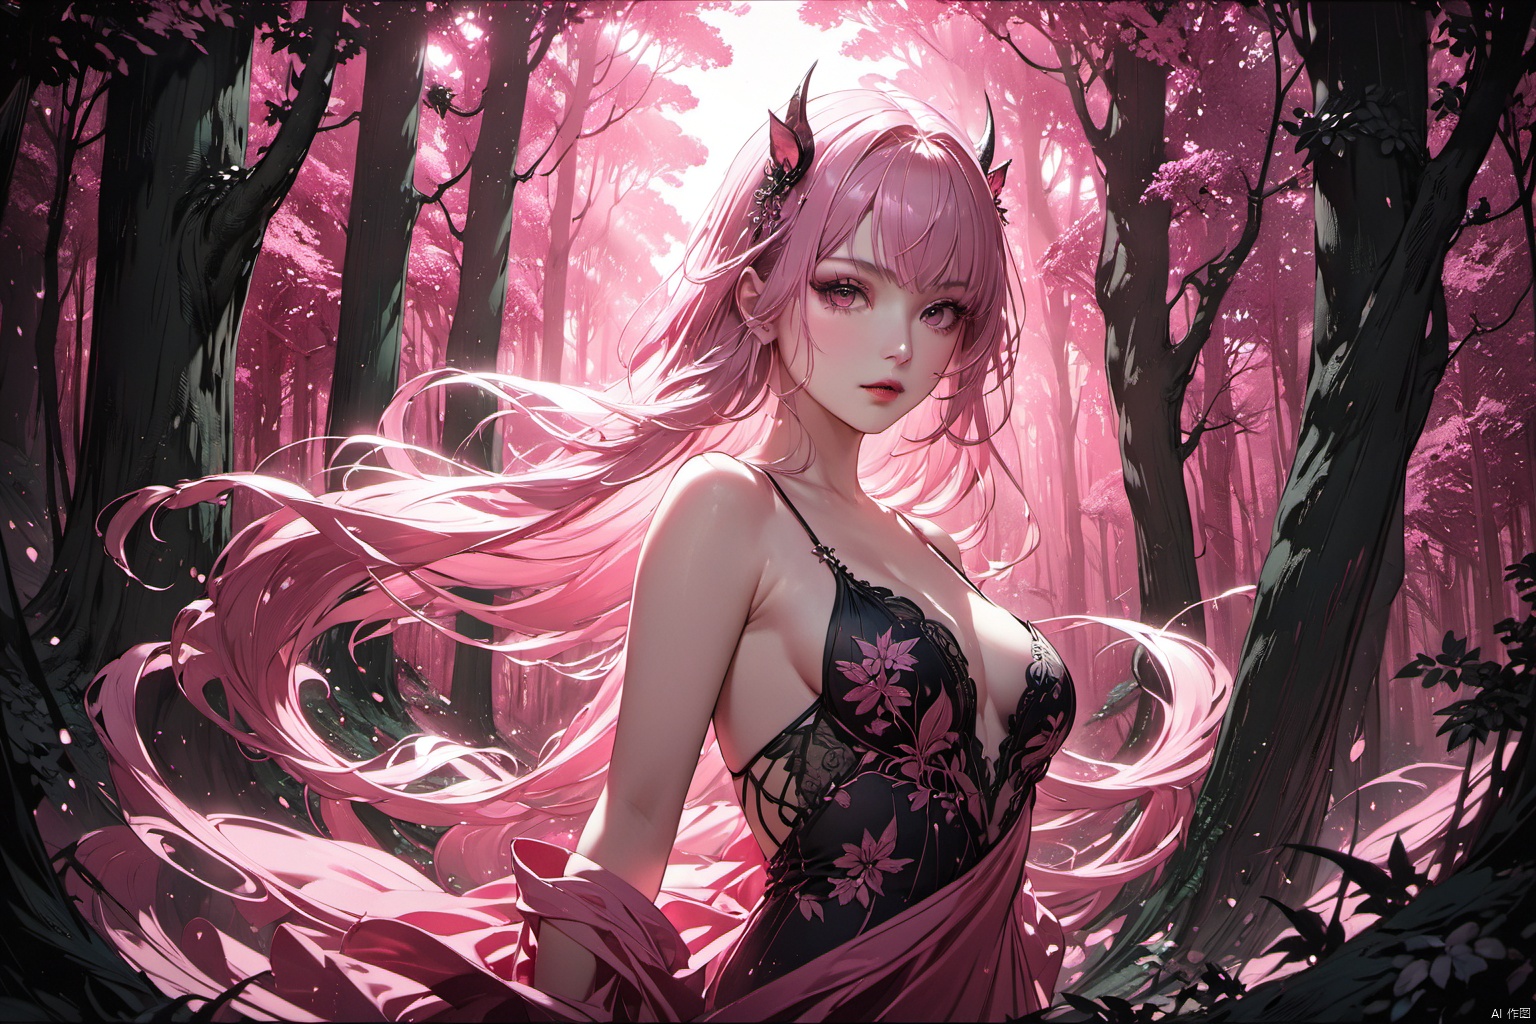  ultra-detailed,(best quality),((masterpiece)),(highres),original,extremely detailed 8K wallpaper,(an extremely delicate and beautiful),anime,detail face and eyes, perfect hands,  (close up , solo),   Pink theme, 

An anime illustration of a succubus with flowing long hair, set in a forest with cinematic lighting effects that create striking contrasts between light and shadow.